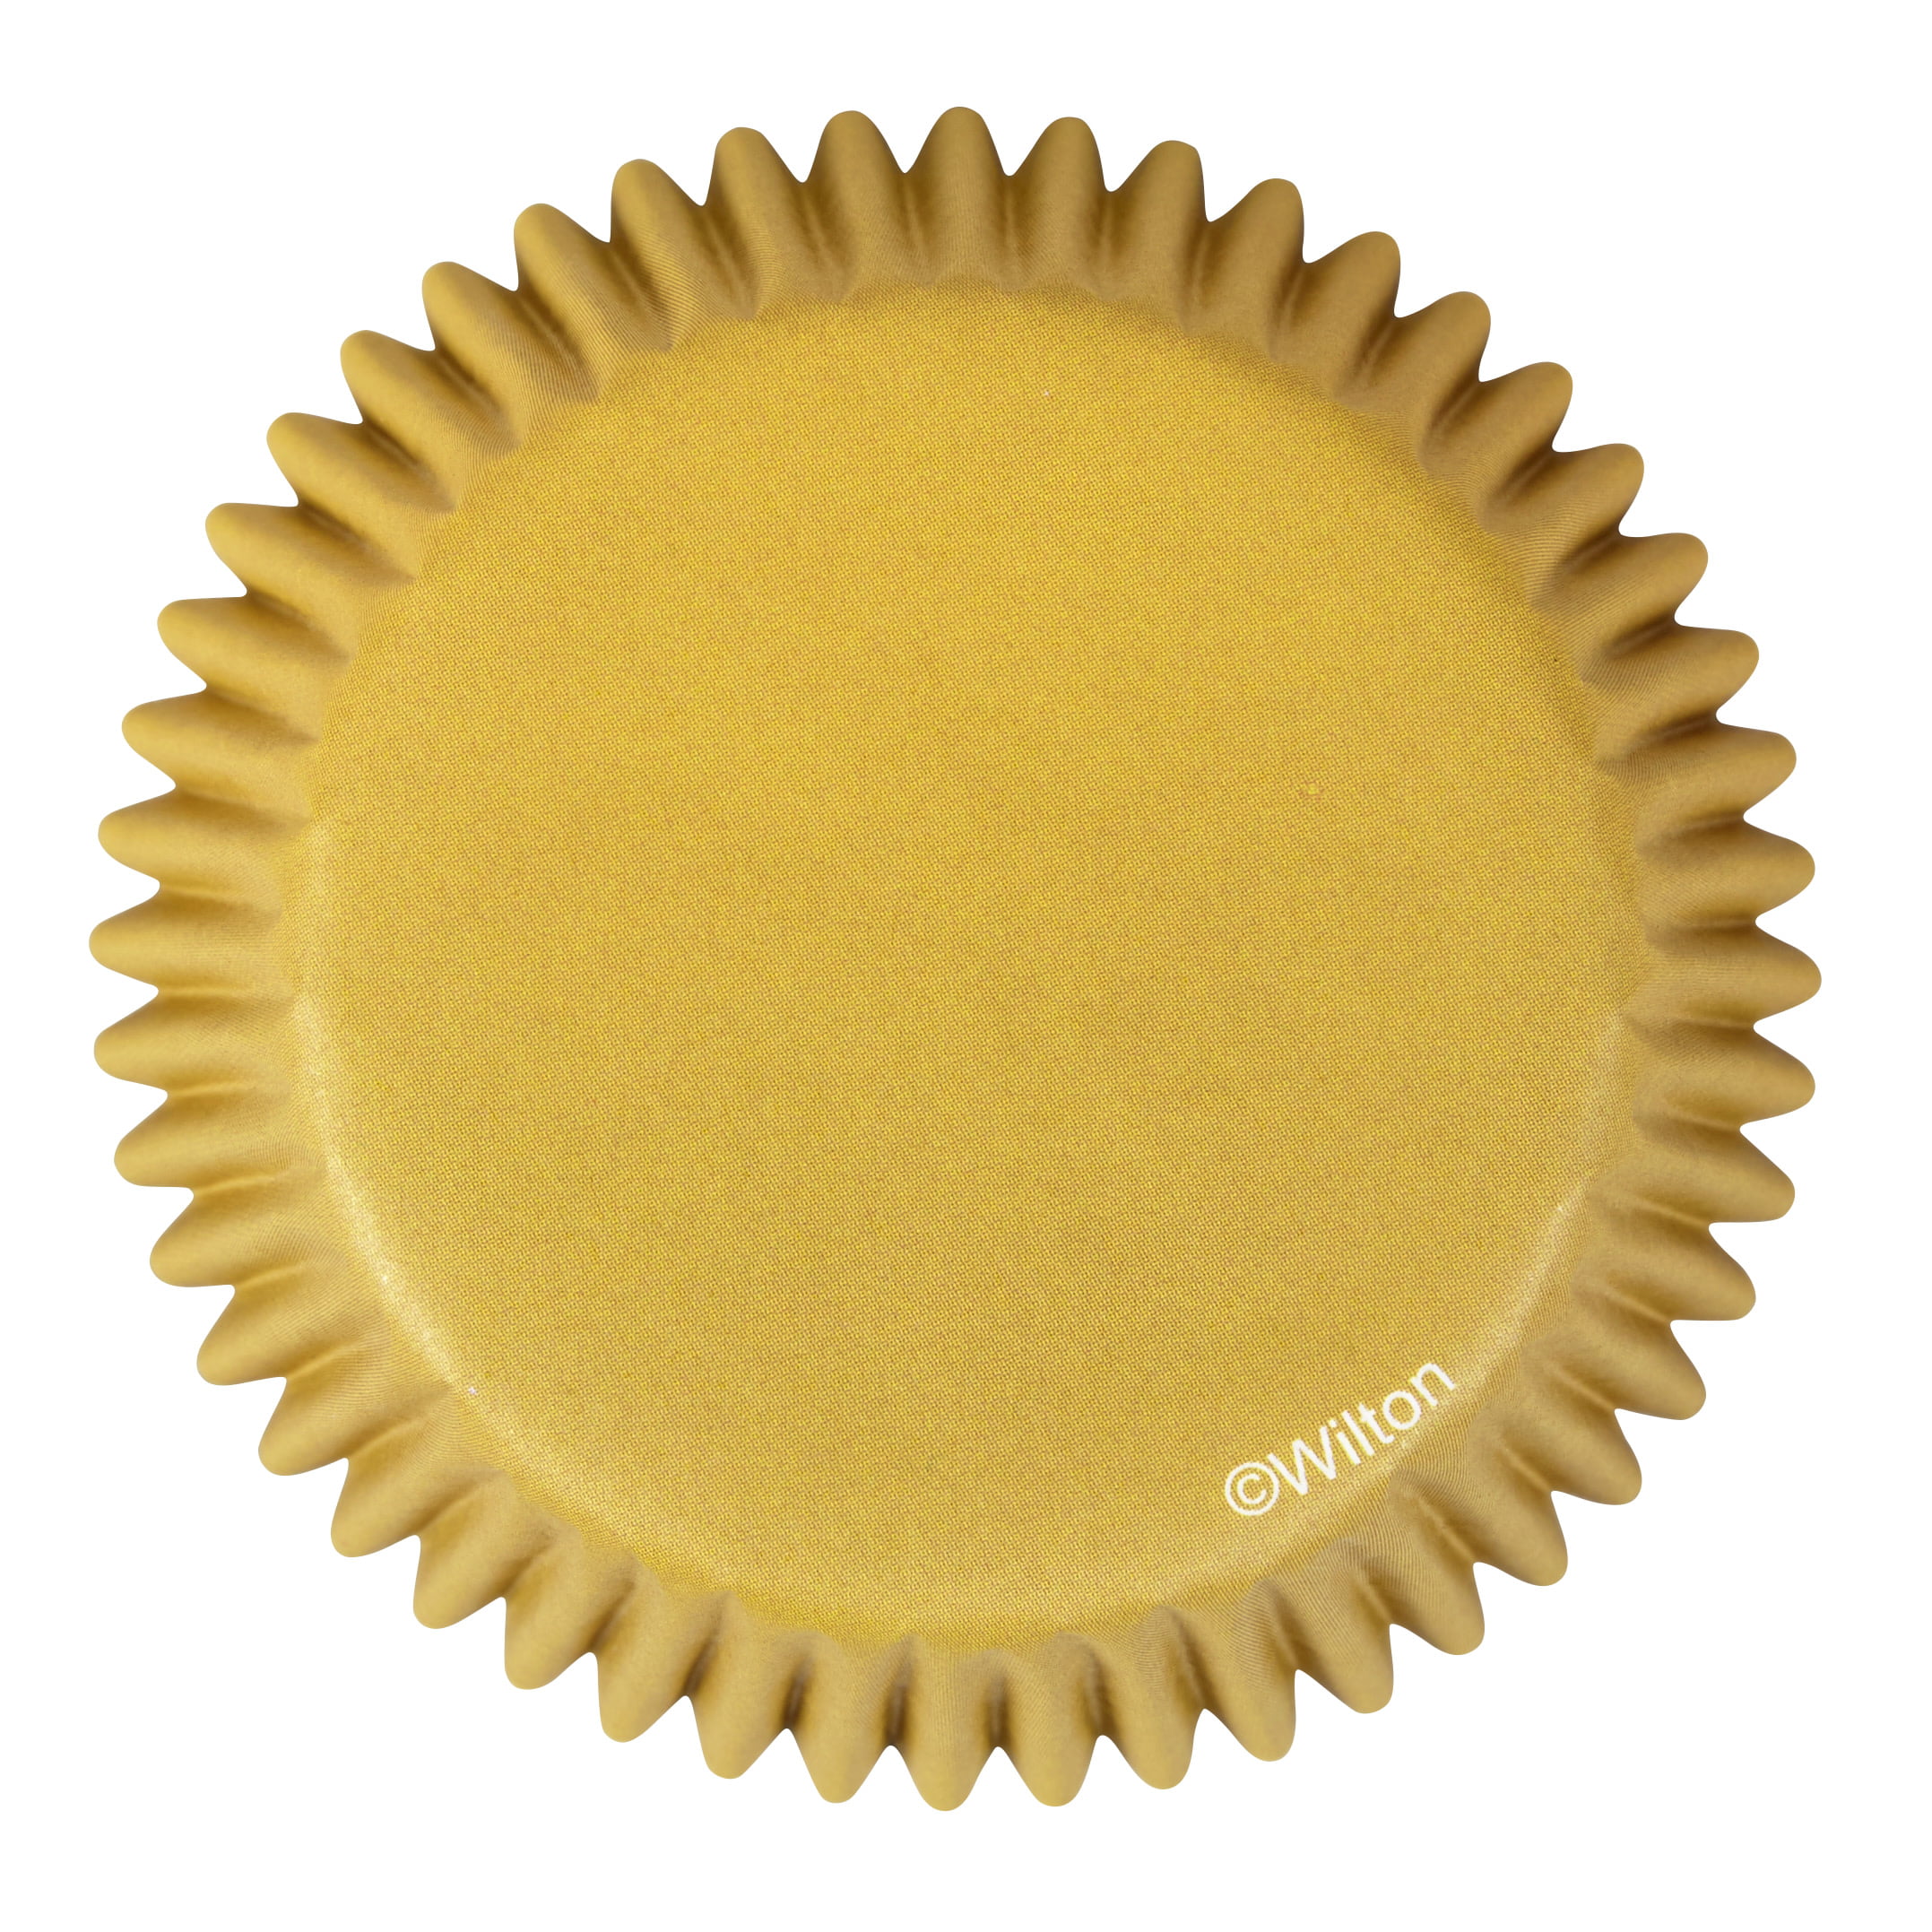 Gold Foil Cupcake Liners, 24-Count - Wilton